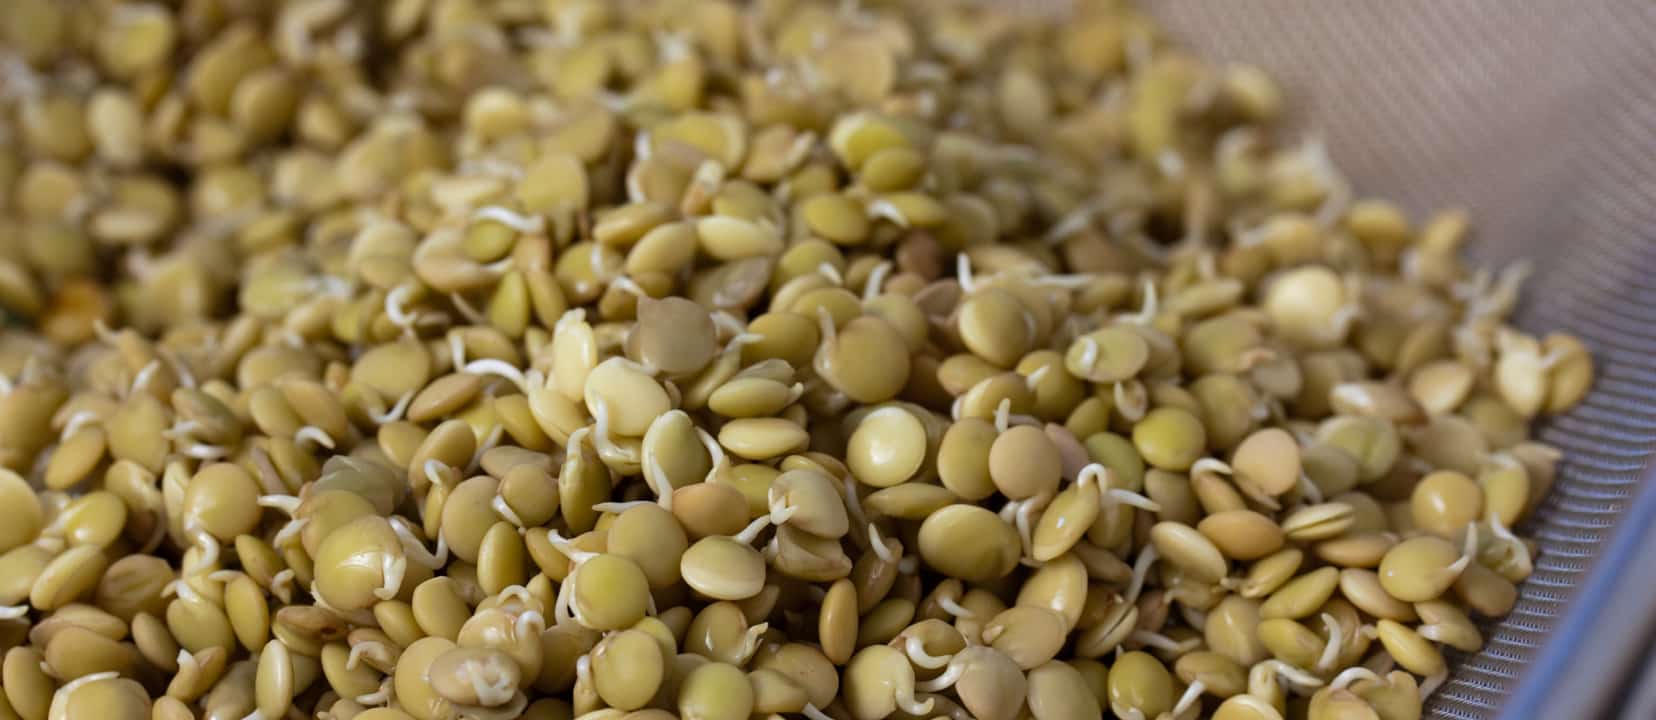 NF Apr28 Cooked Beans or Sprouted Beans - خواص جوانه ها ؛ تامین ویتامین ها و املاح مورد نیاز بدن با مصرف جوانه ها